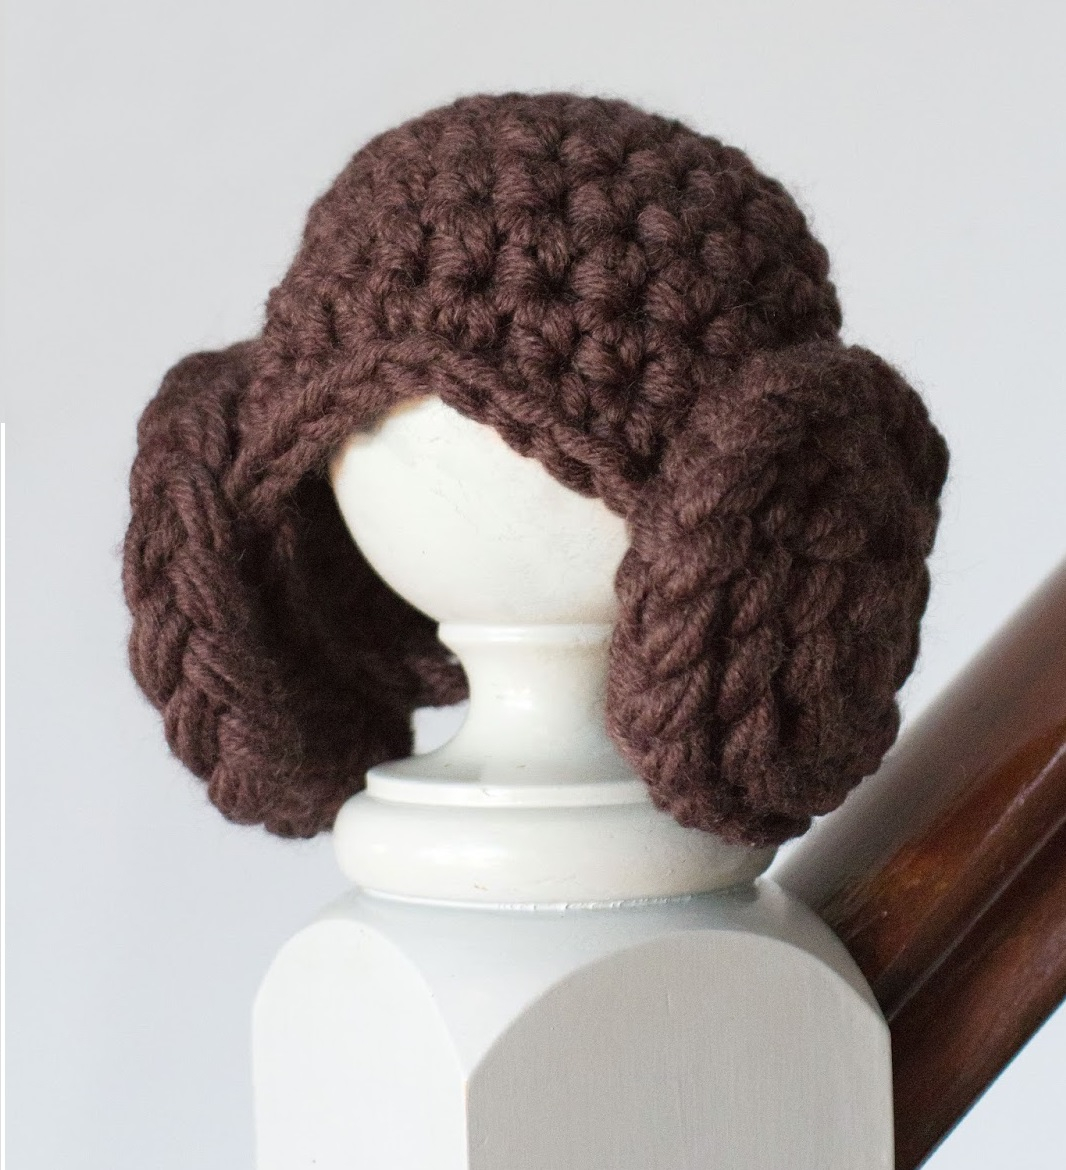 Free Crochet Yoda Hat Pattern The Star Wars Crochet Patterns Youre Looking For Stitch And Unwind